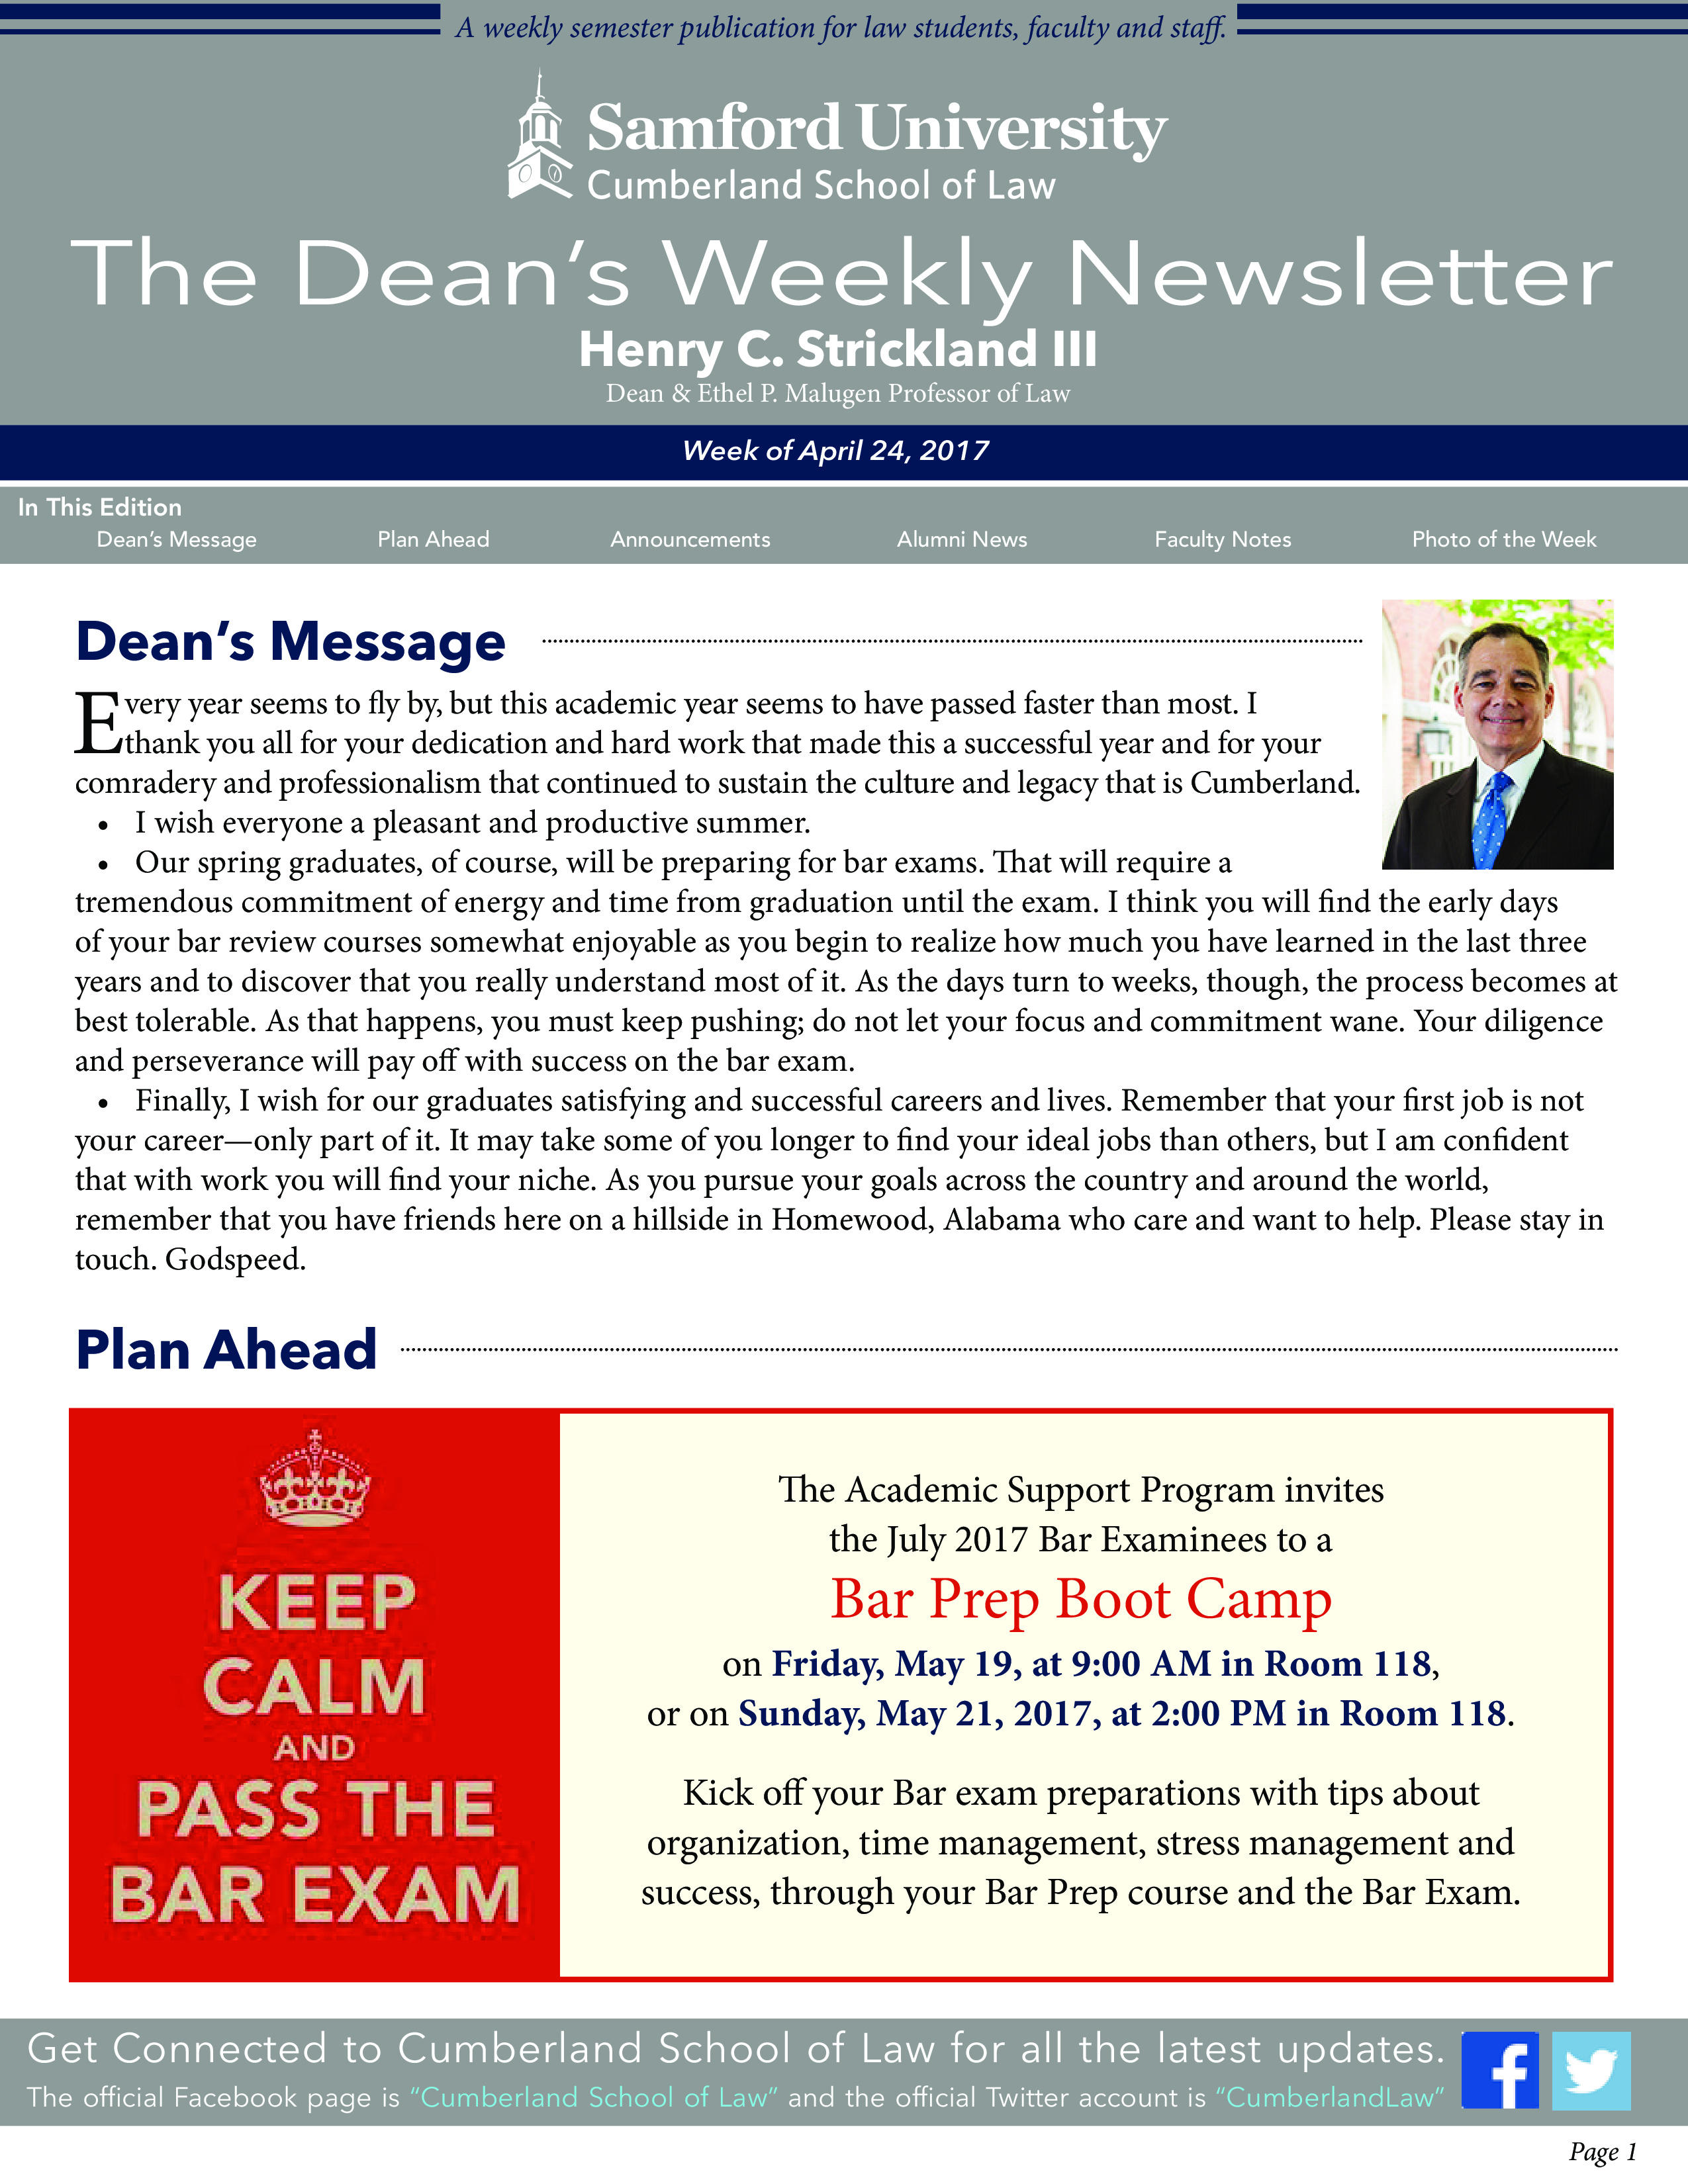 Weekly University Newsletter Example Templates At Allbusinesstemplates Com